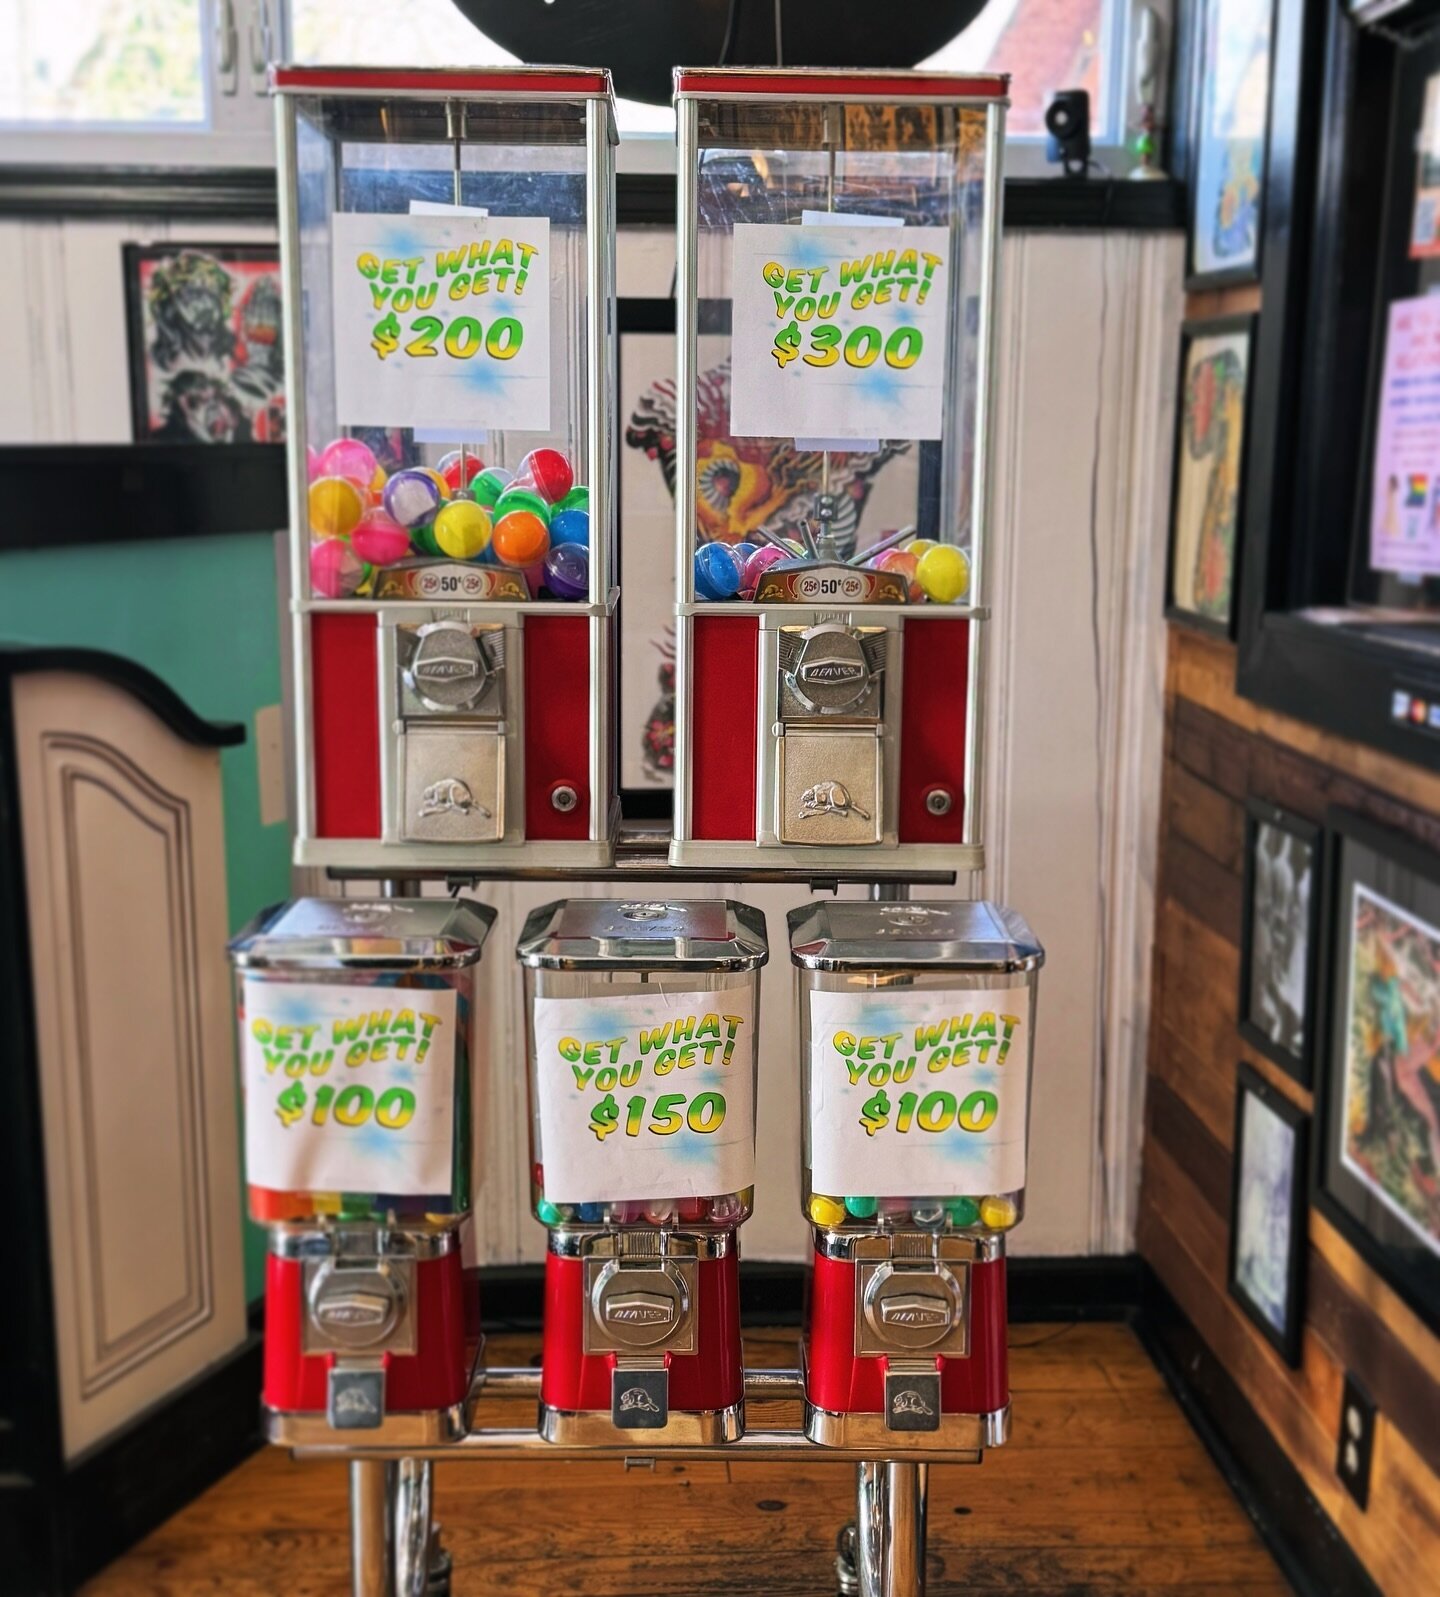 The &ldquo;Get What You Get&rdquo; tattoo machines are always on! All winners, no whammies! $100-300 with one $20 do-over option. What will you get?? 🐉💘💀🌸🍄👹🗡️🐶
.
#gwyg #gwygtattoo #getwhatyouget #getwhatyougettattoo #gumball #atlantatattoosho